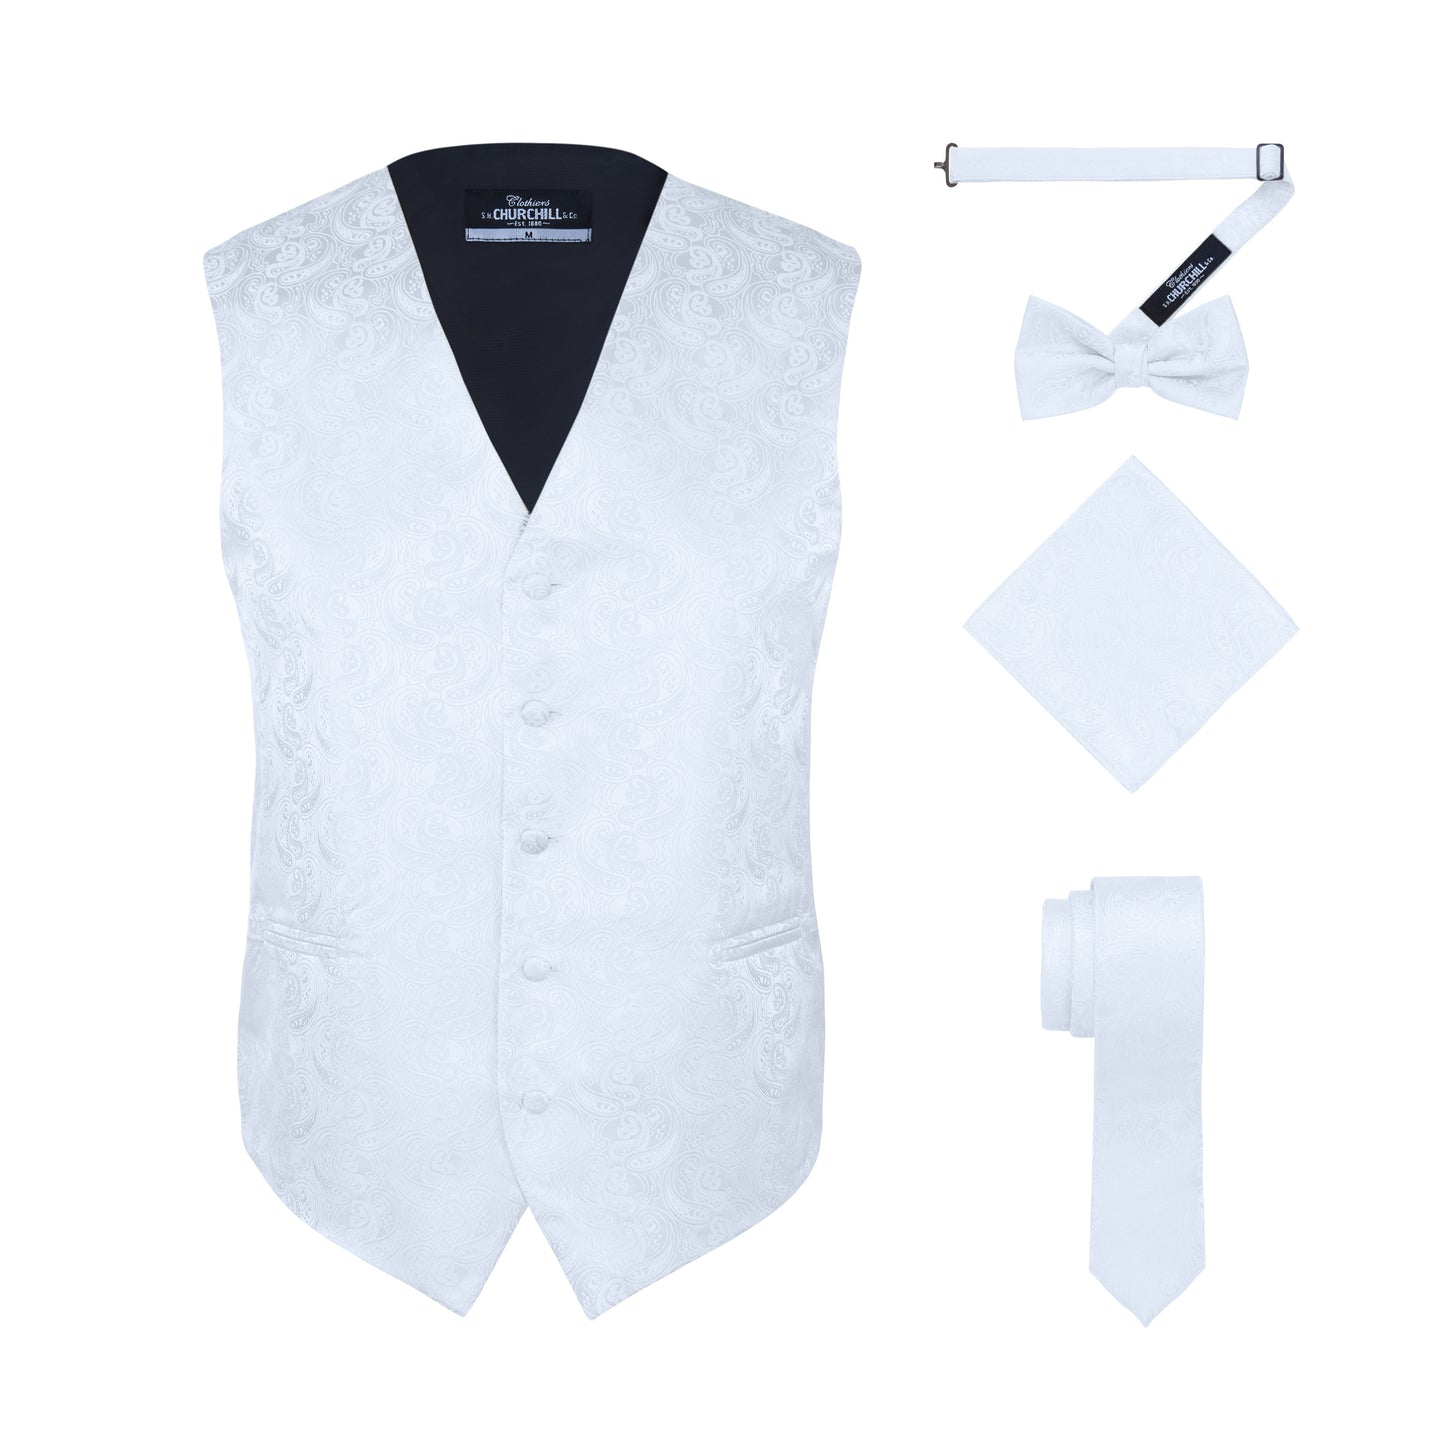 S.H. Churchill & Co. Men's White Paisley Vest Set, with Bow Tie, Neck Tie and Pocket Hanky